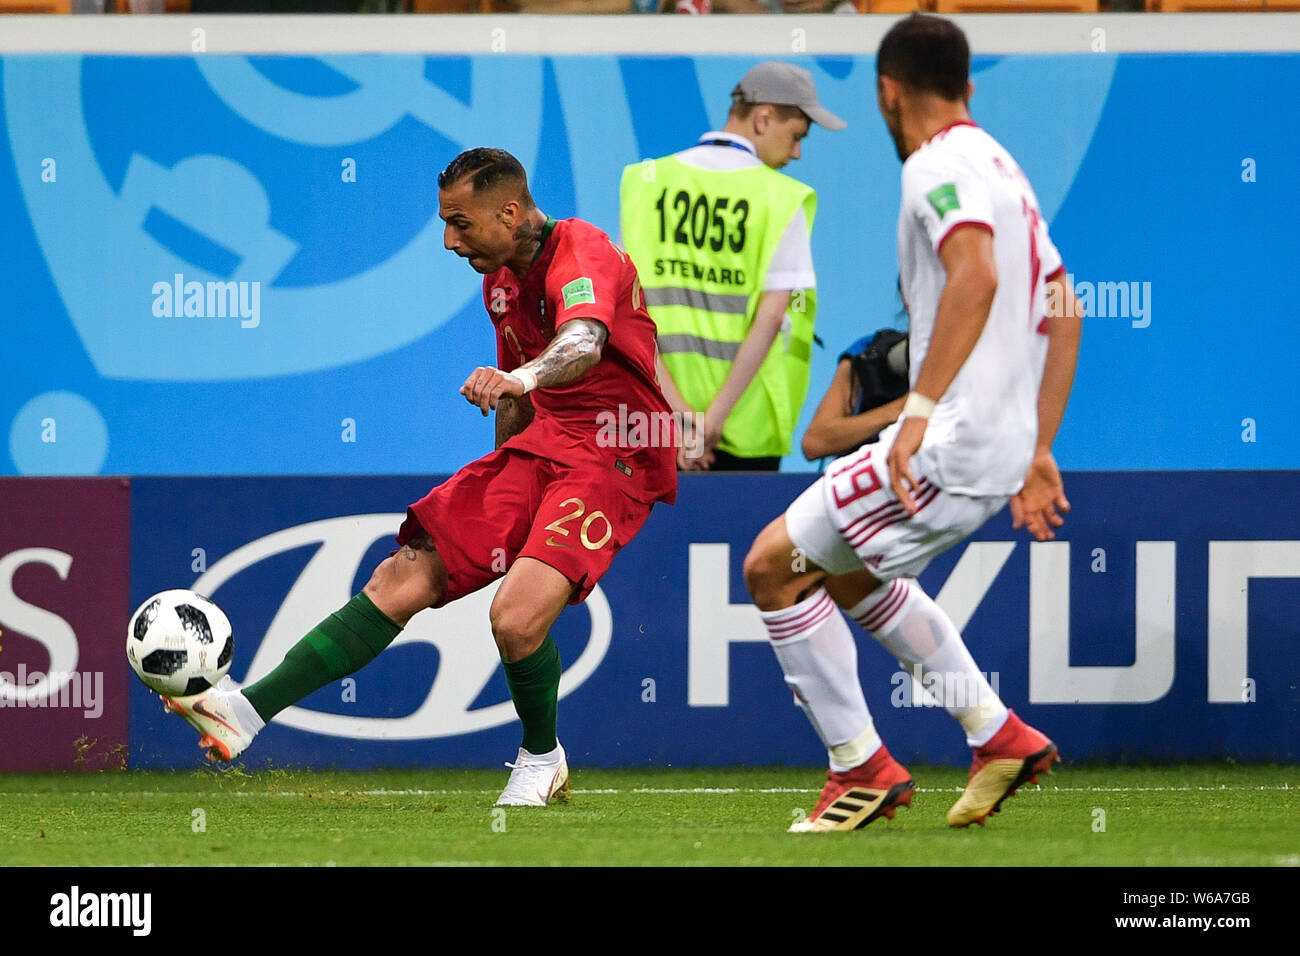 Ricardo Quaresma of Portugal, left, makes a pass against Majid Hosseini of Iran in their Group B match during the 2018 FIFA World Cup in Saransk, Russ Stock Photo